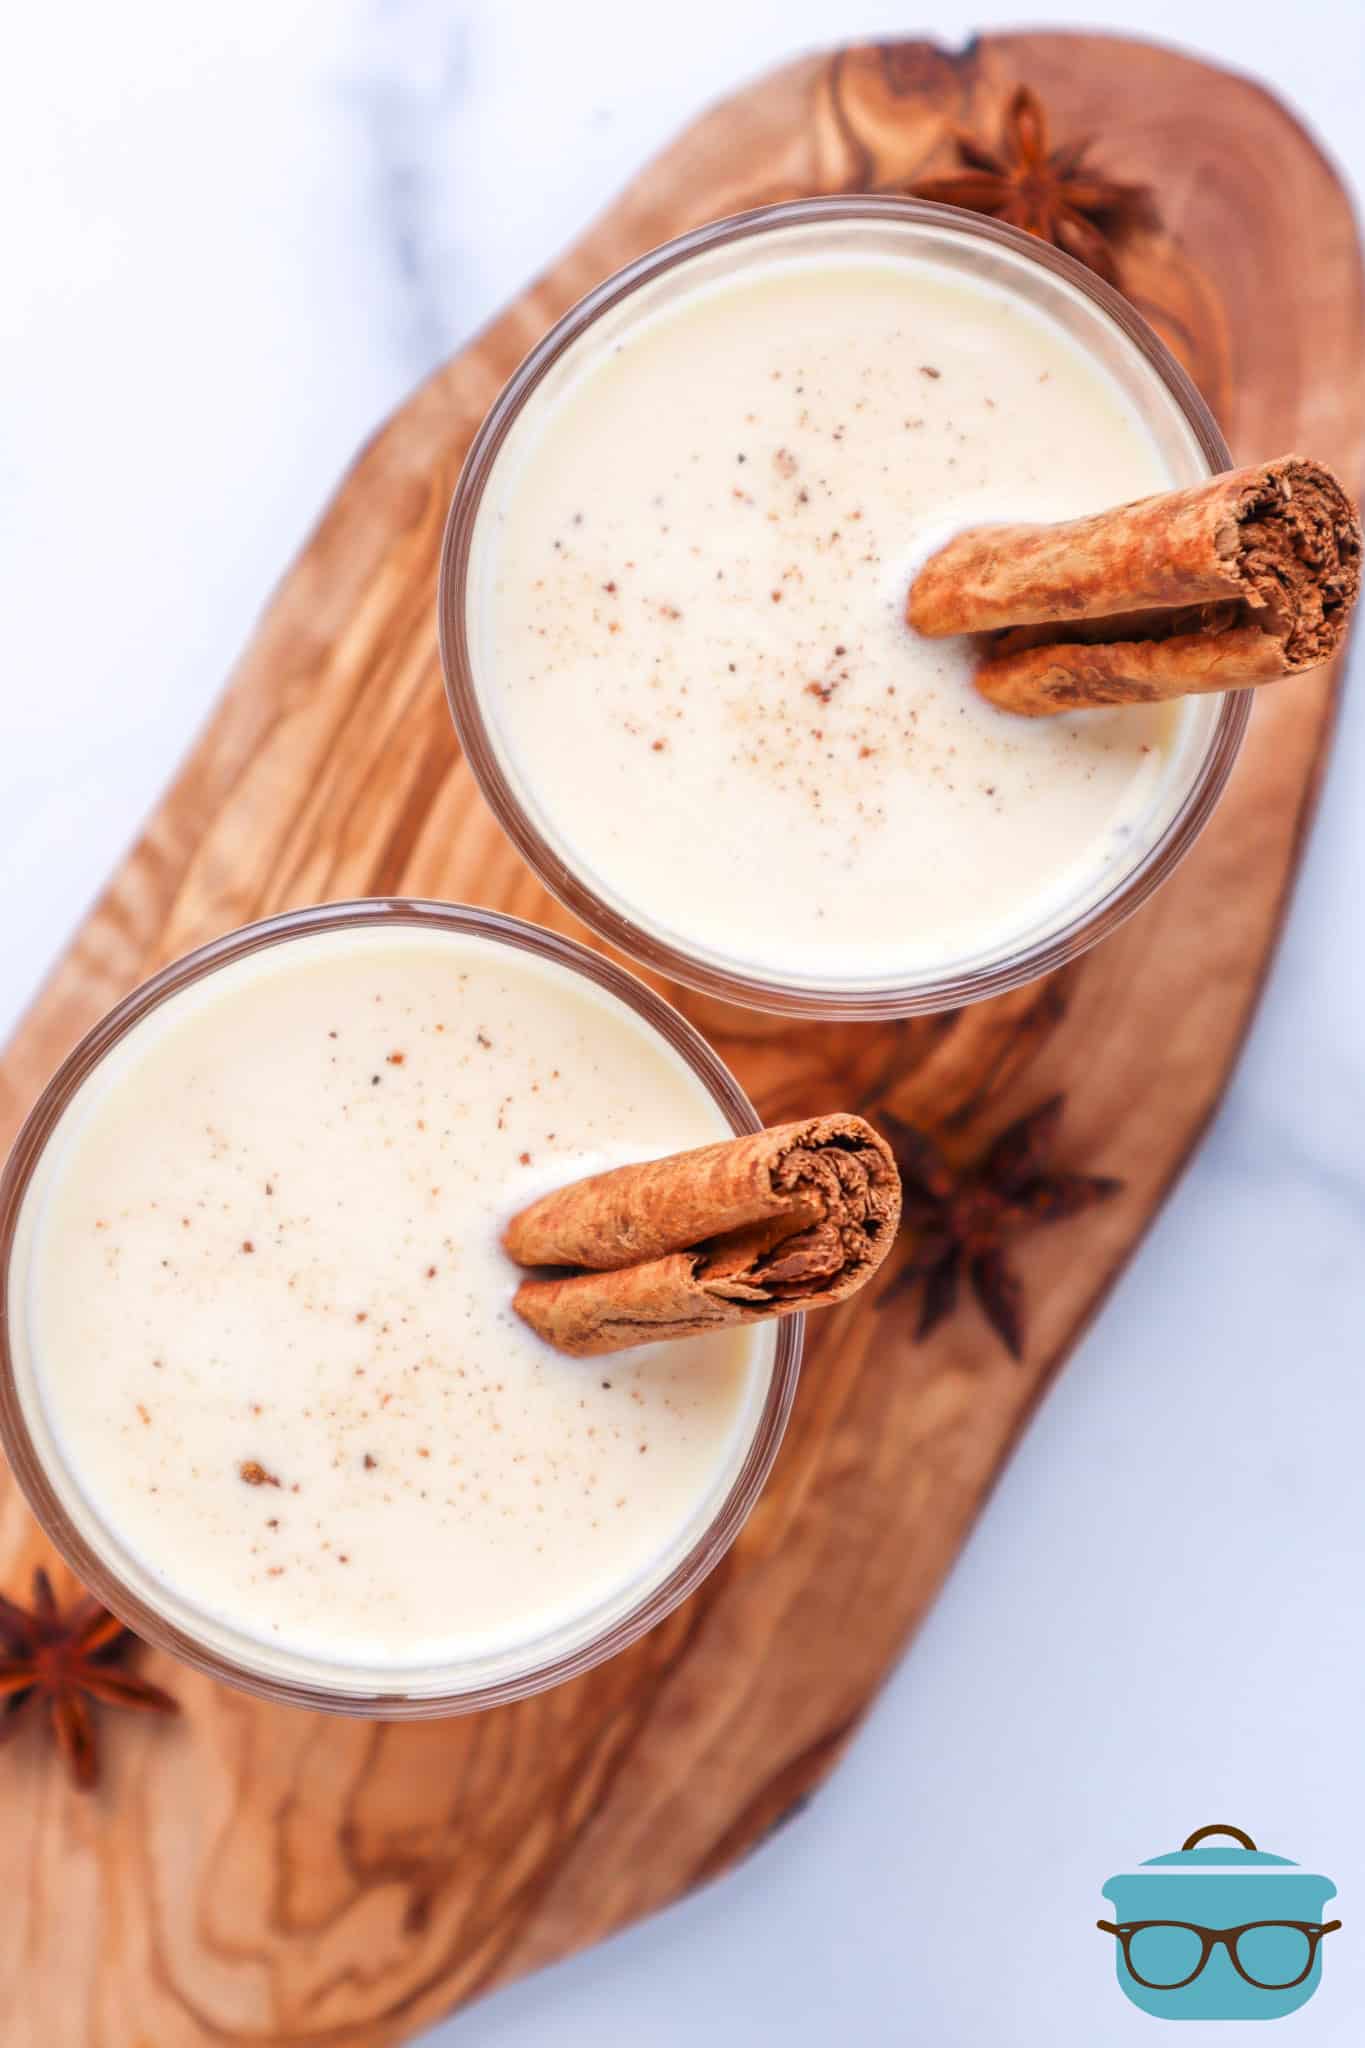 Instant Pot Egg Nog shown in two small, clear glasses with sticks of cinnamon in each glass shown on a wooden cutting board.